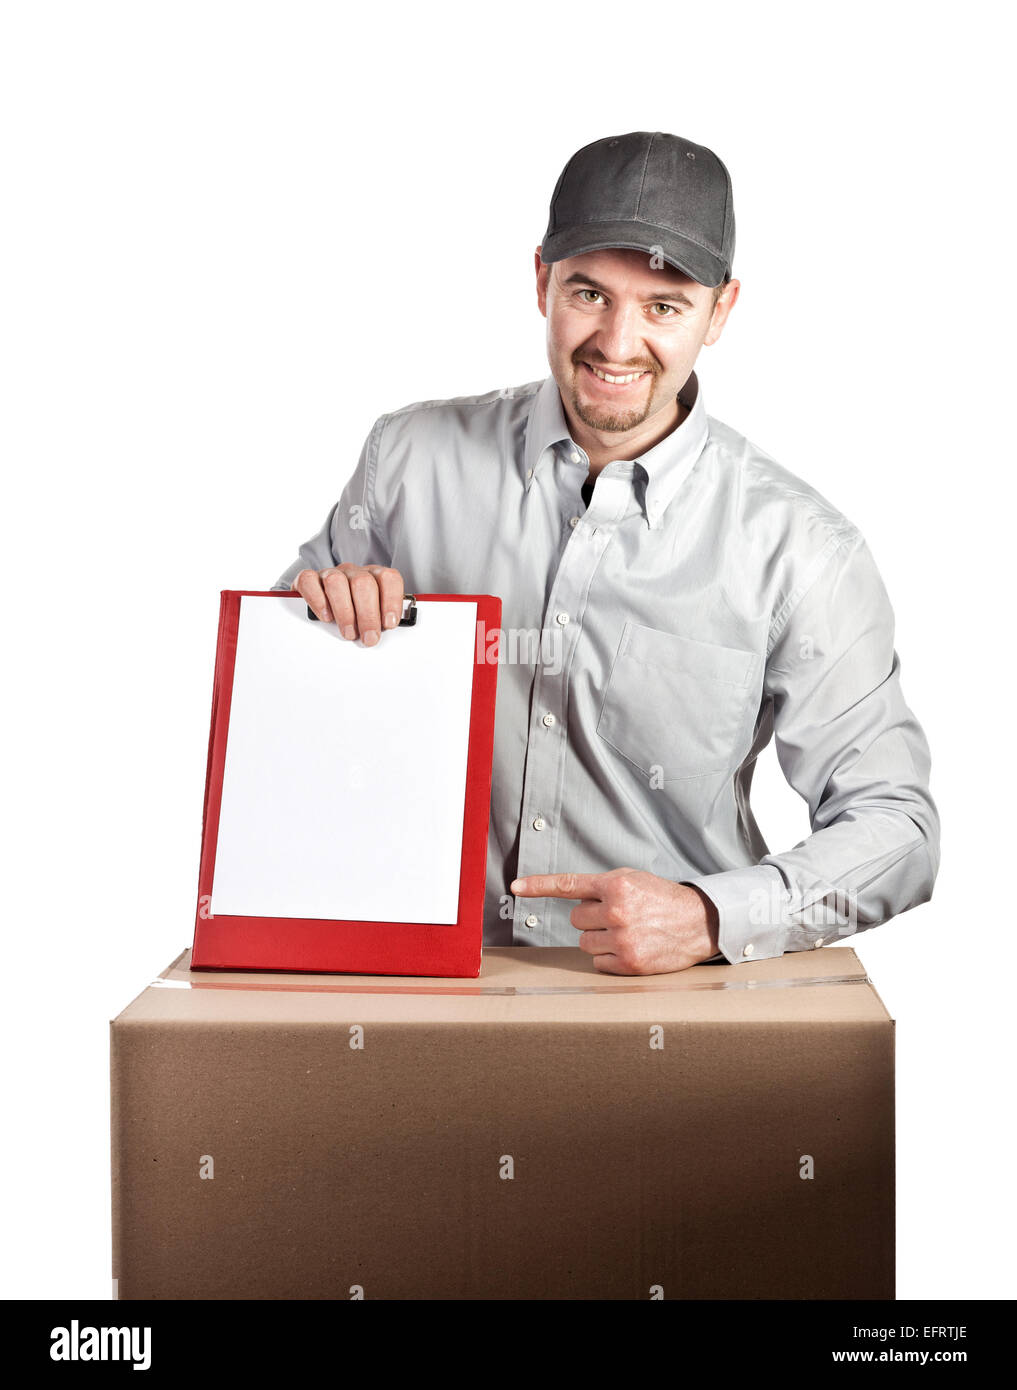 portrait of caucasian delivery man on white background Stock Photo